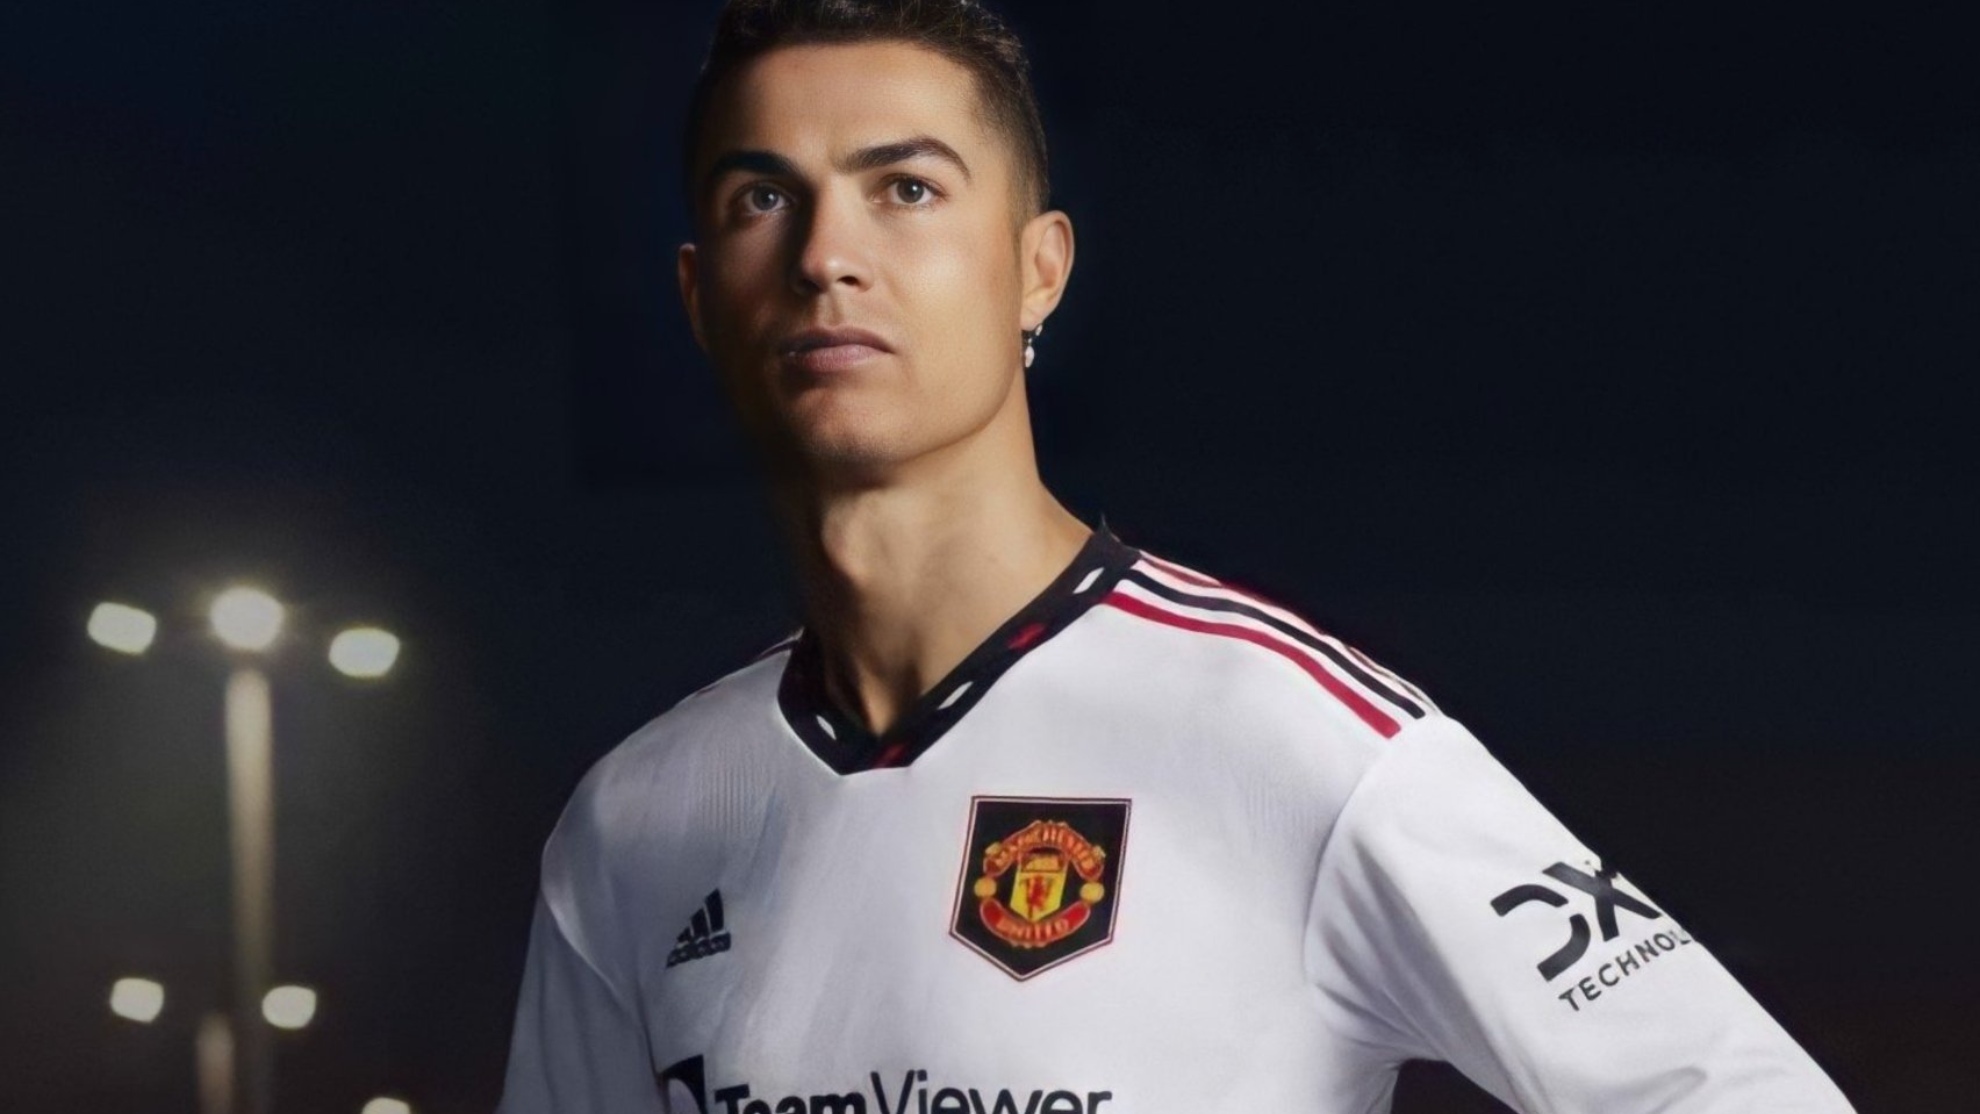 Man Utd News: Cristiano Ronaldo wears the new Manchester United jersey: Is he leaving the club?